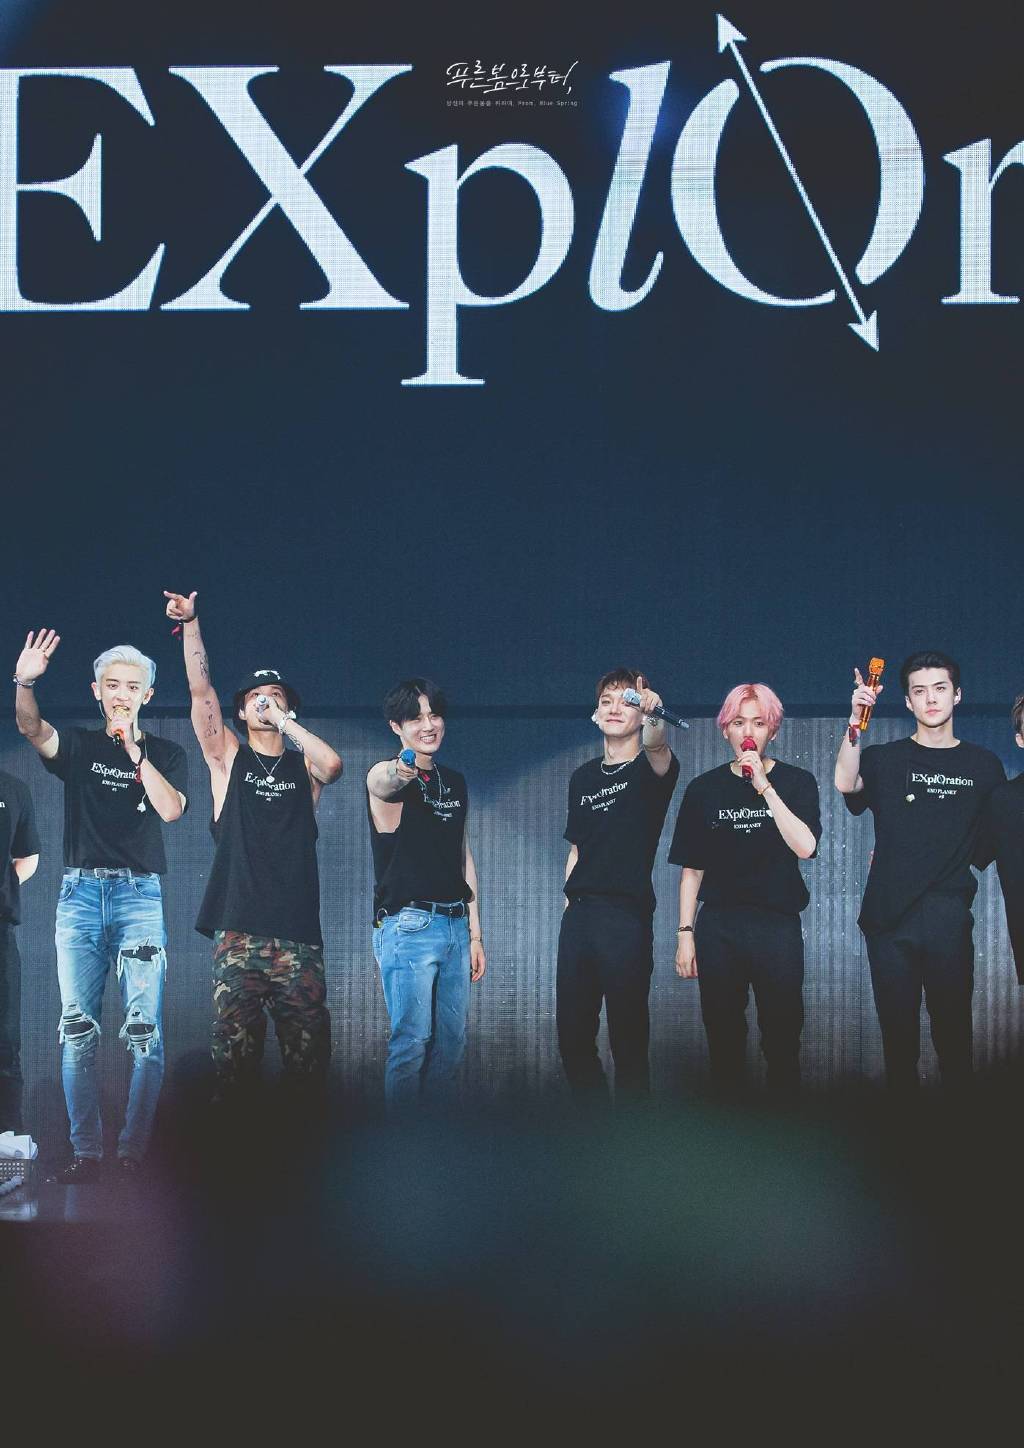 Is EXO Band Going To Disband? Here Is What We Know - OtakuKart